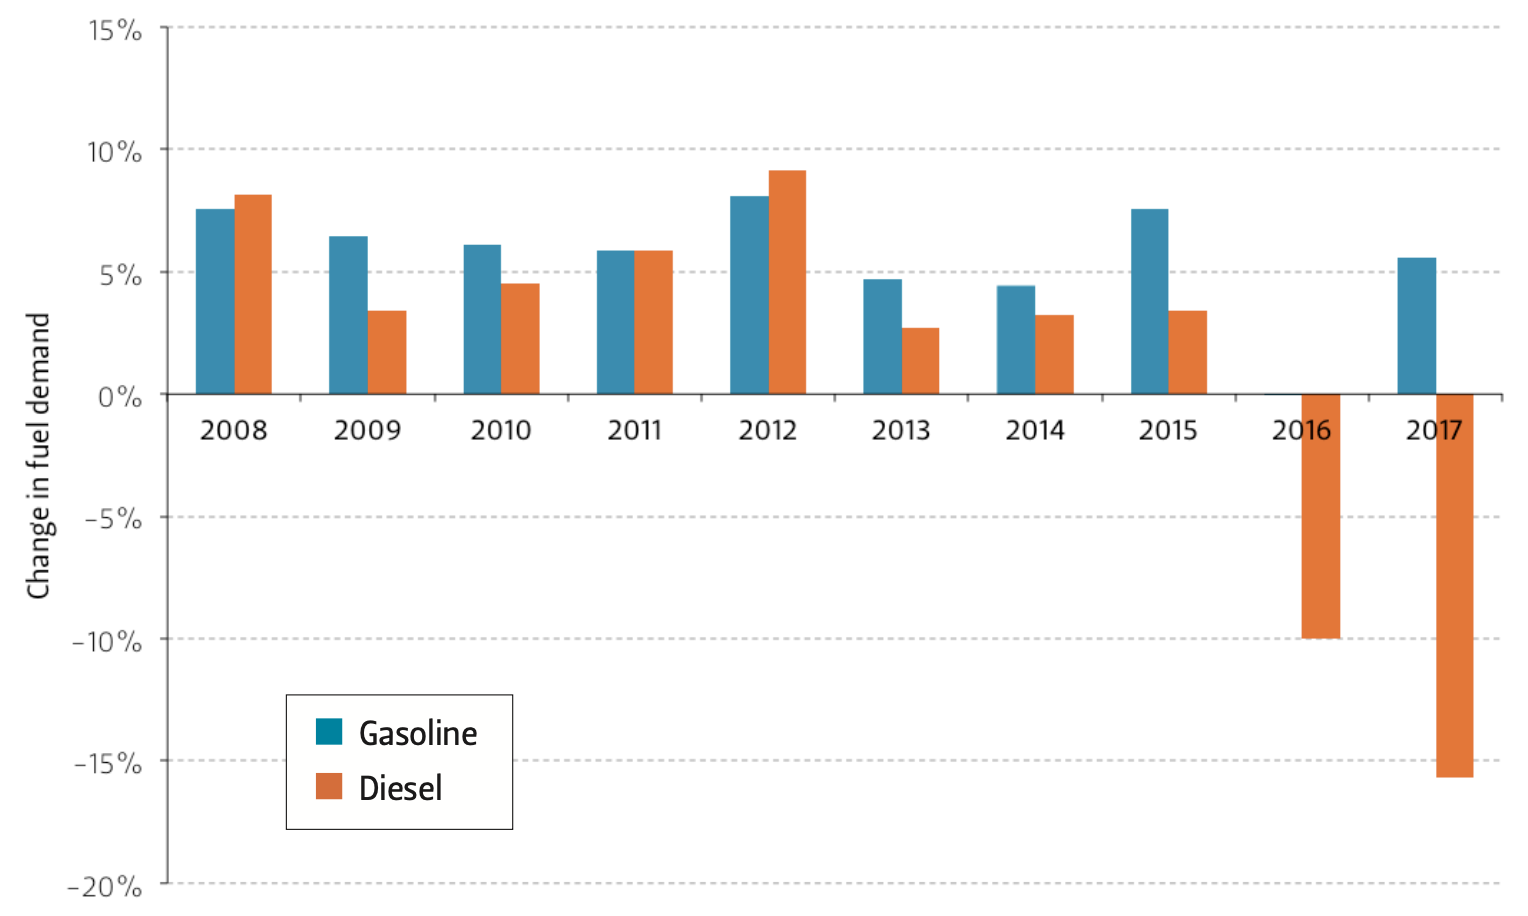 This graph compares Saudi gasoline and diesel demand over time.